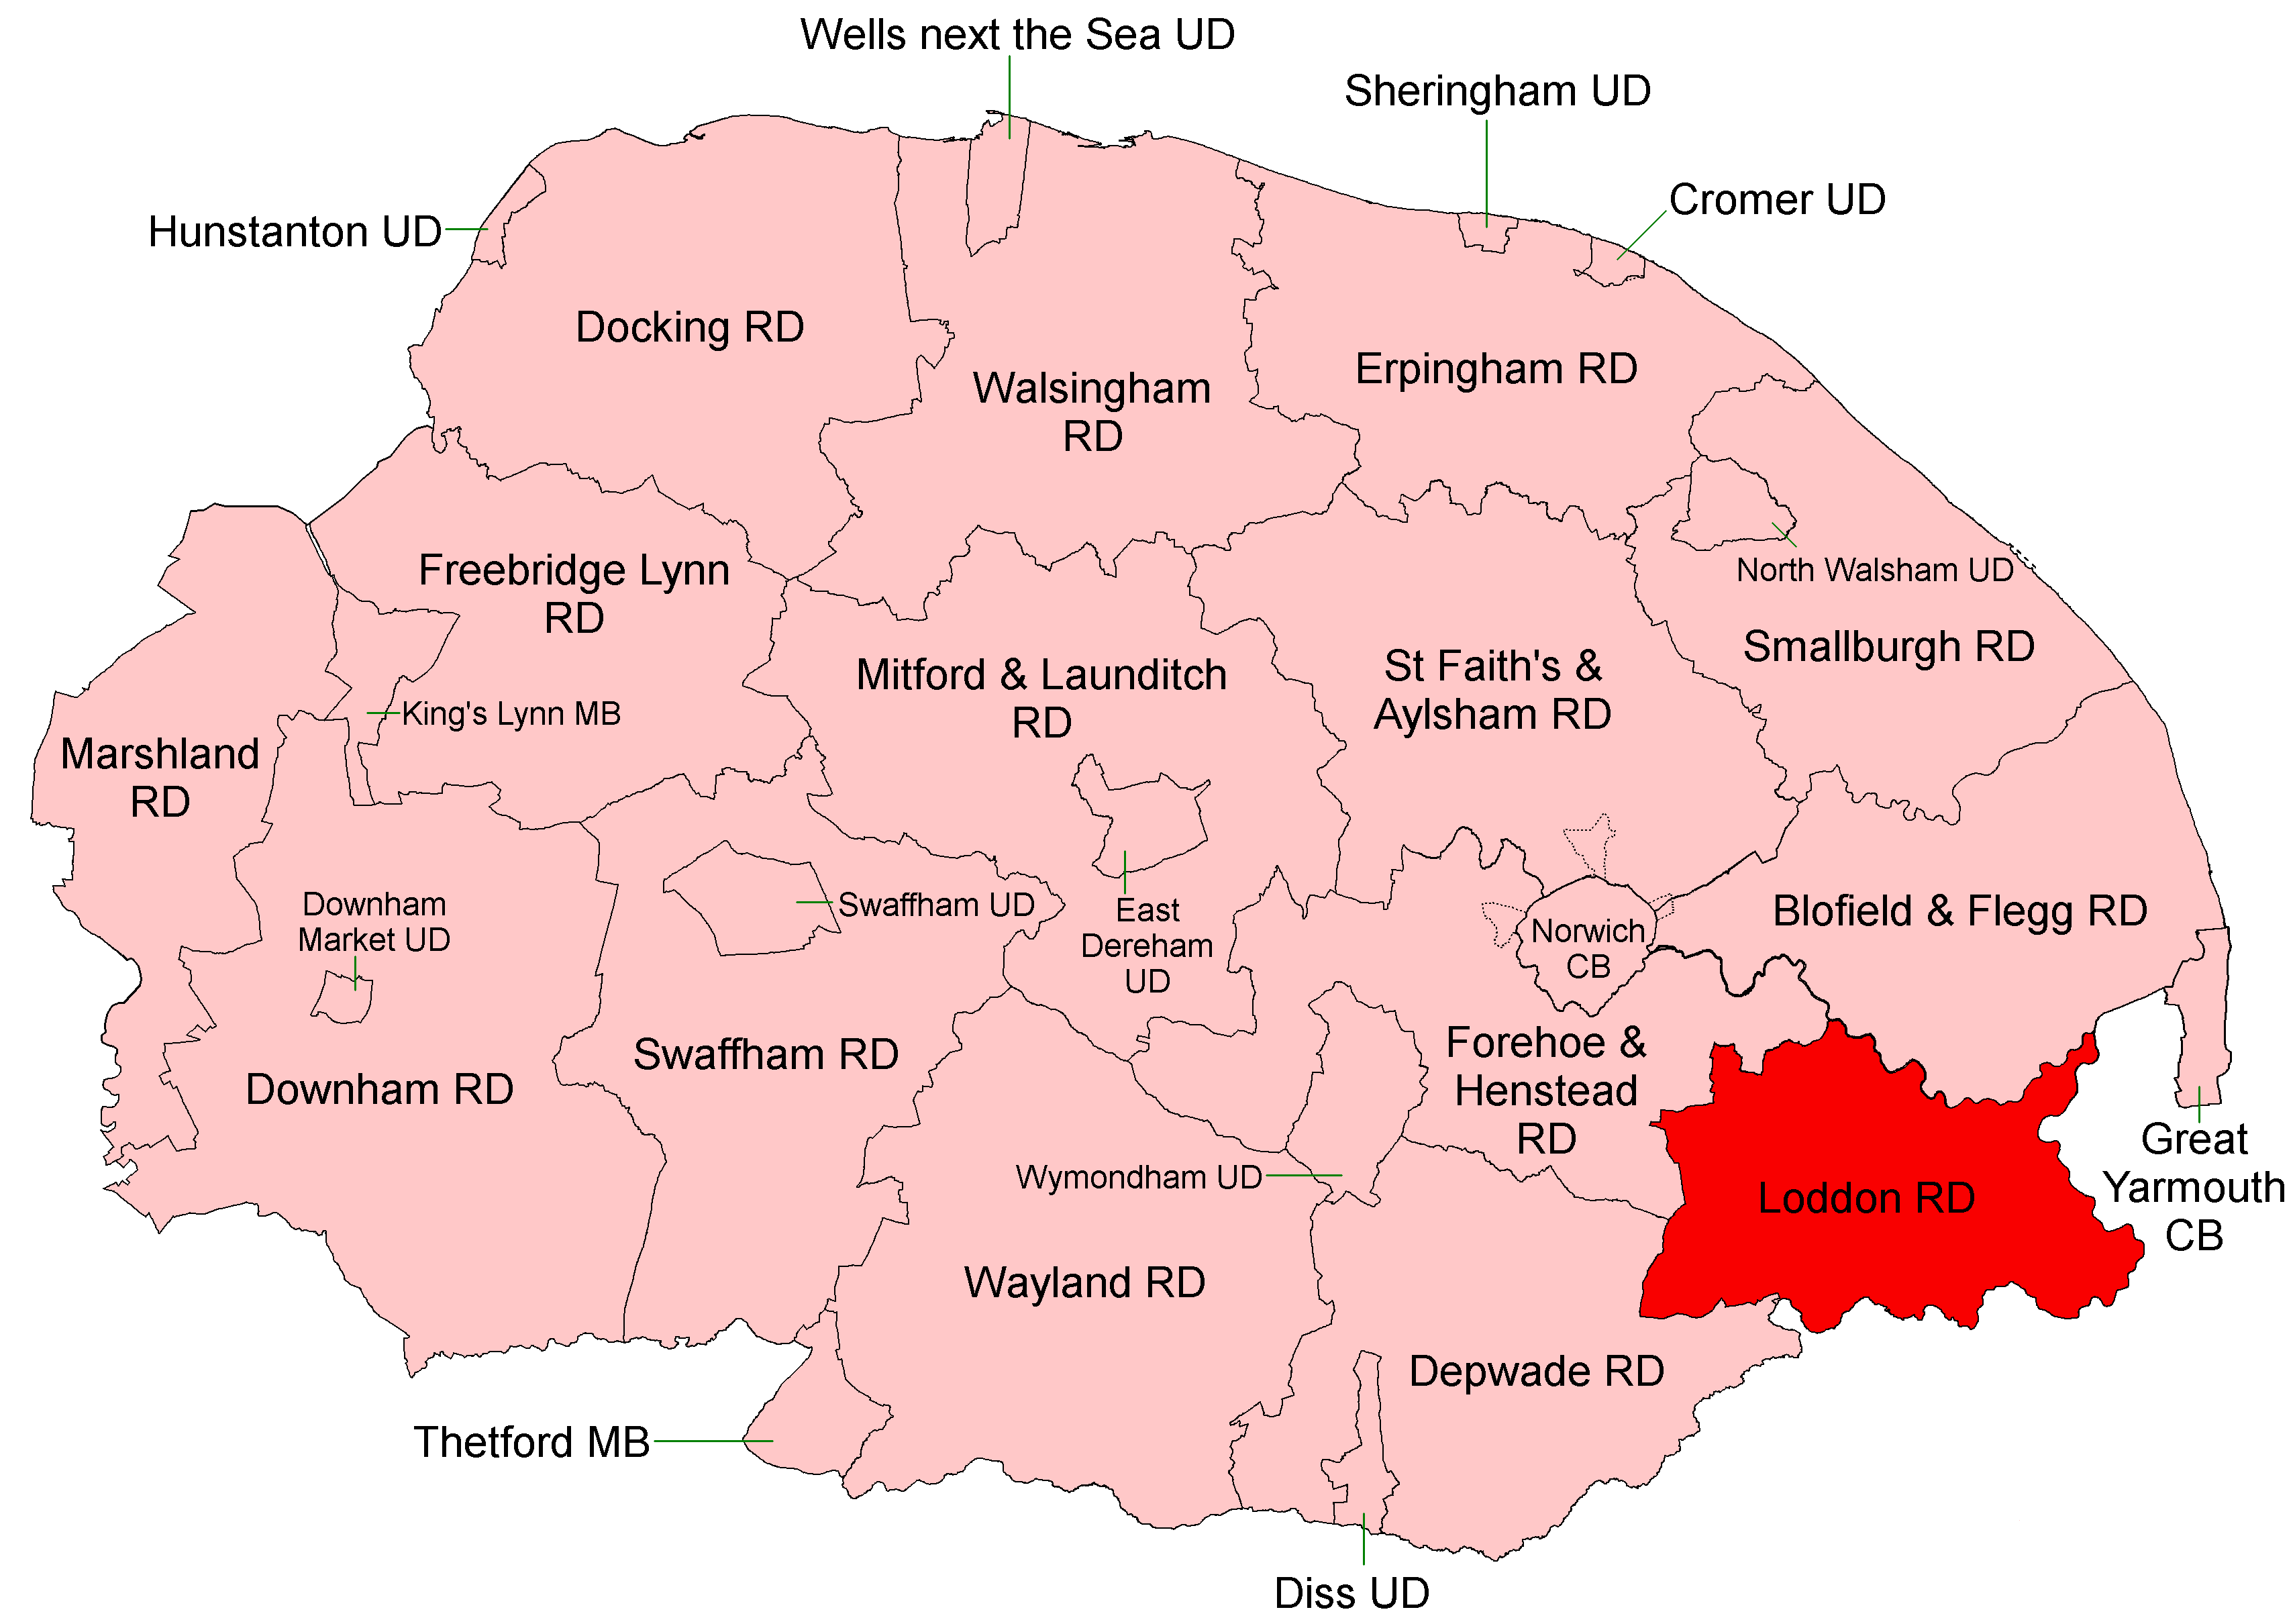 Loddon and Clavering Rural District